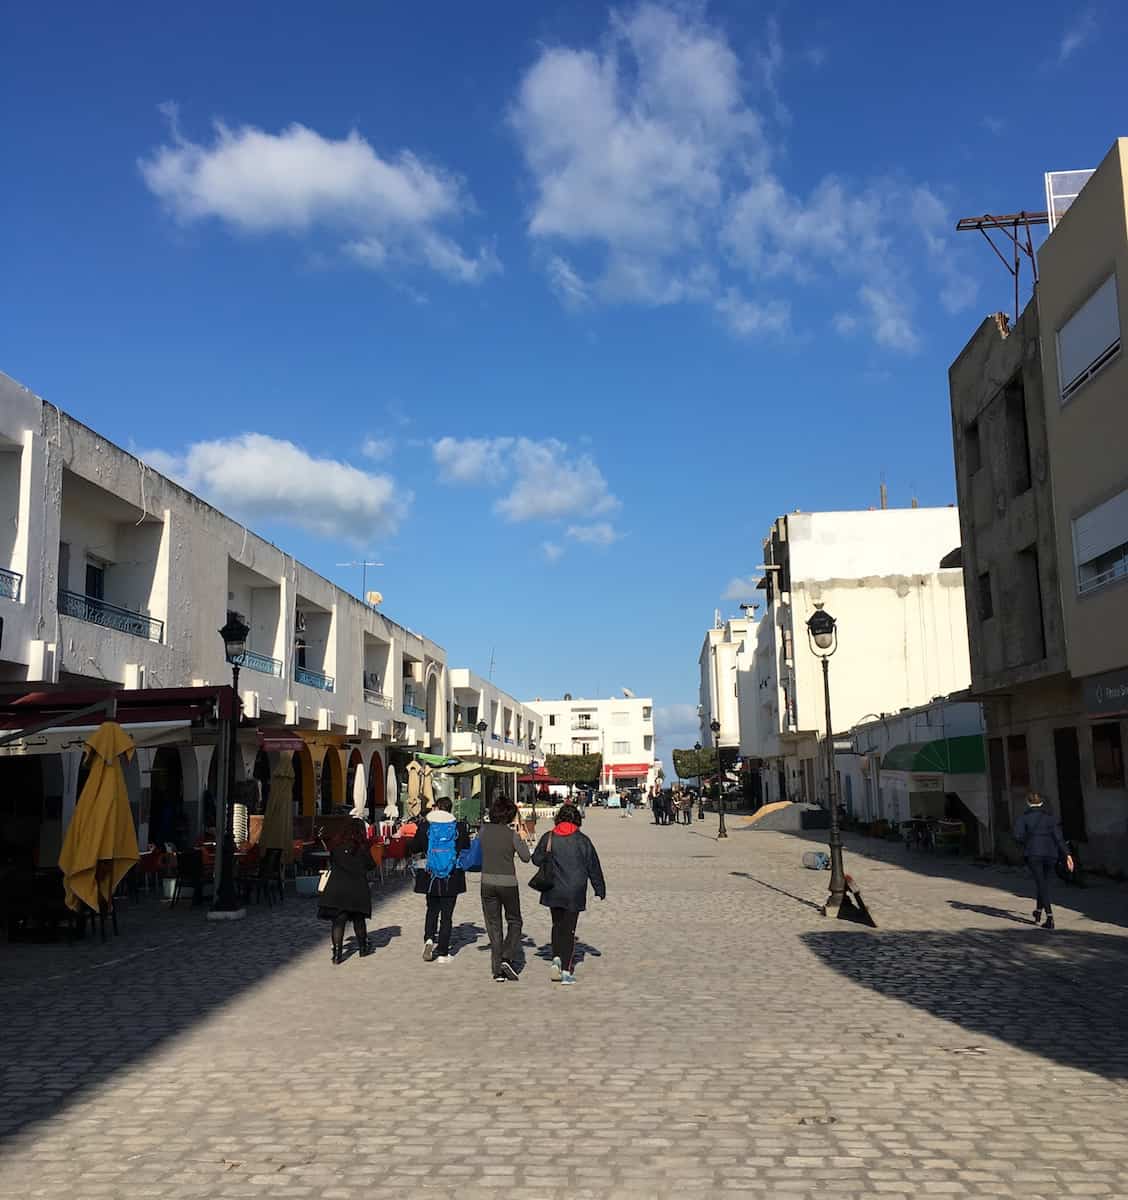 One of the streets in La Marsa